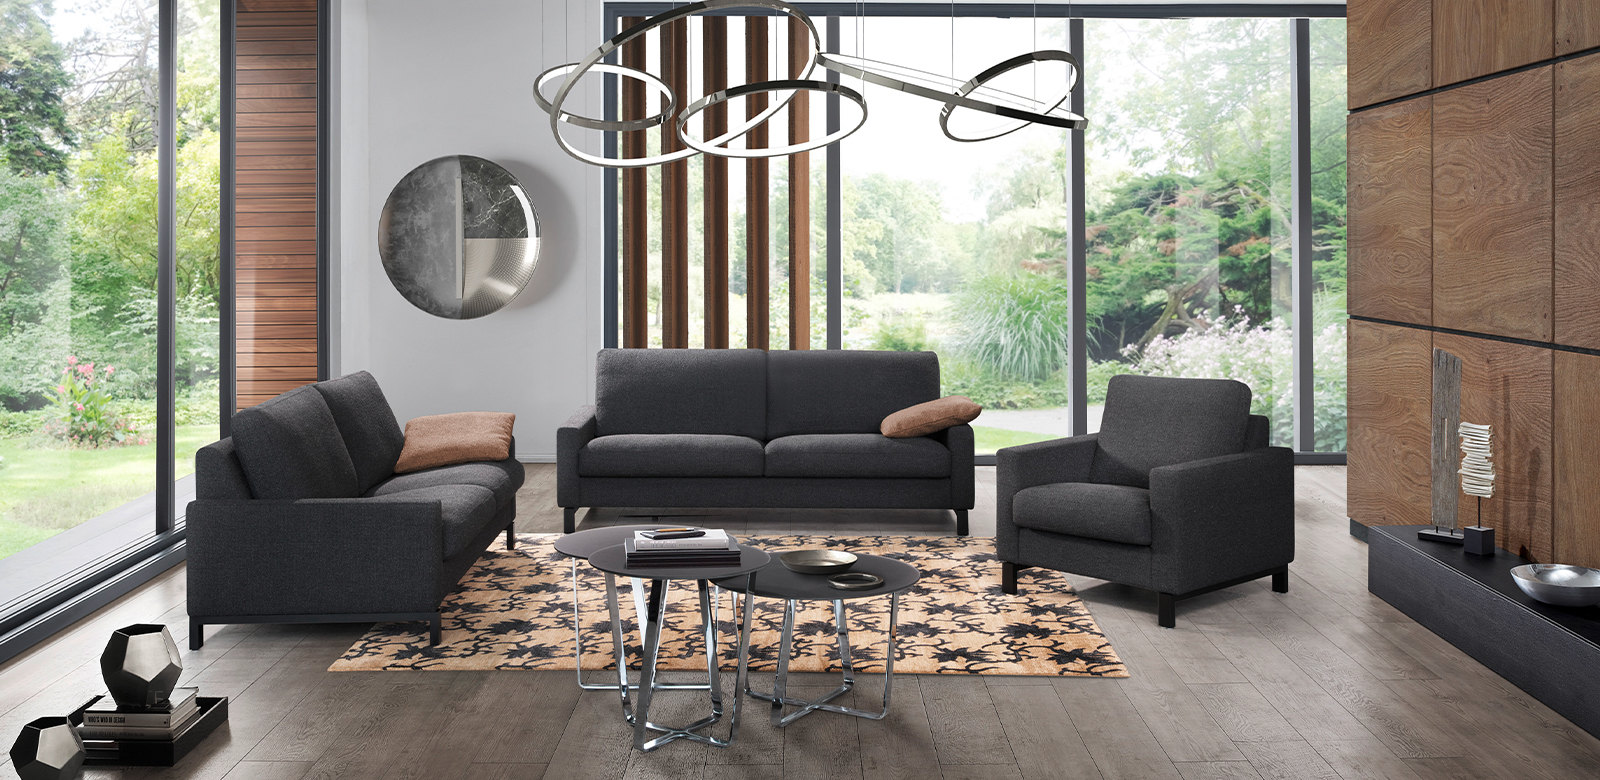 Modern living room with wooden elements and two CL500 sofas and armchairs in grey-black fabric.